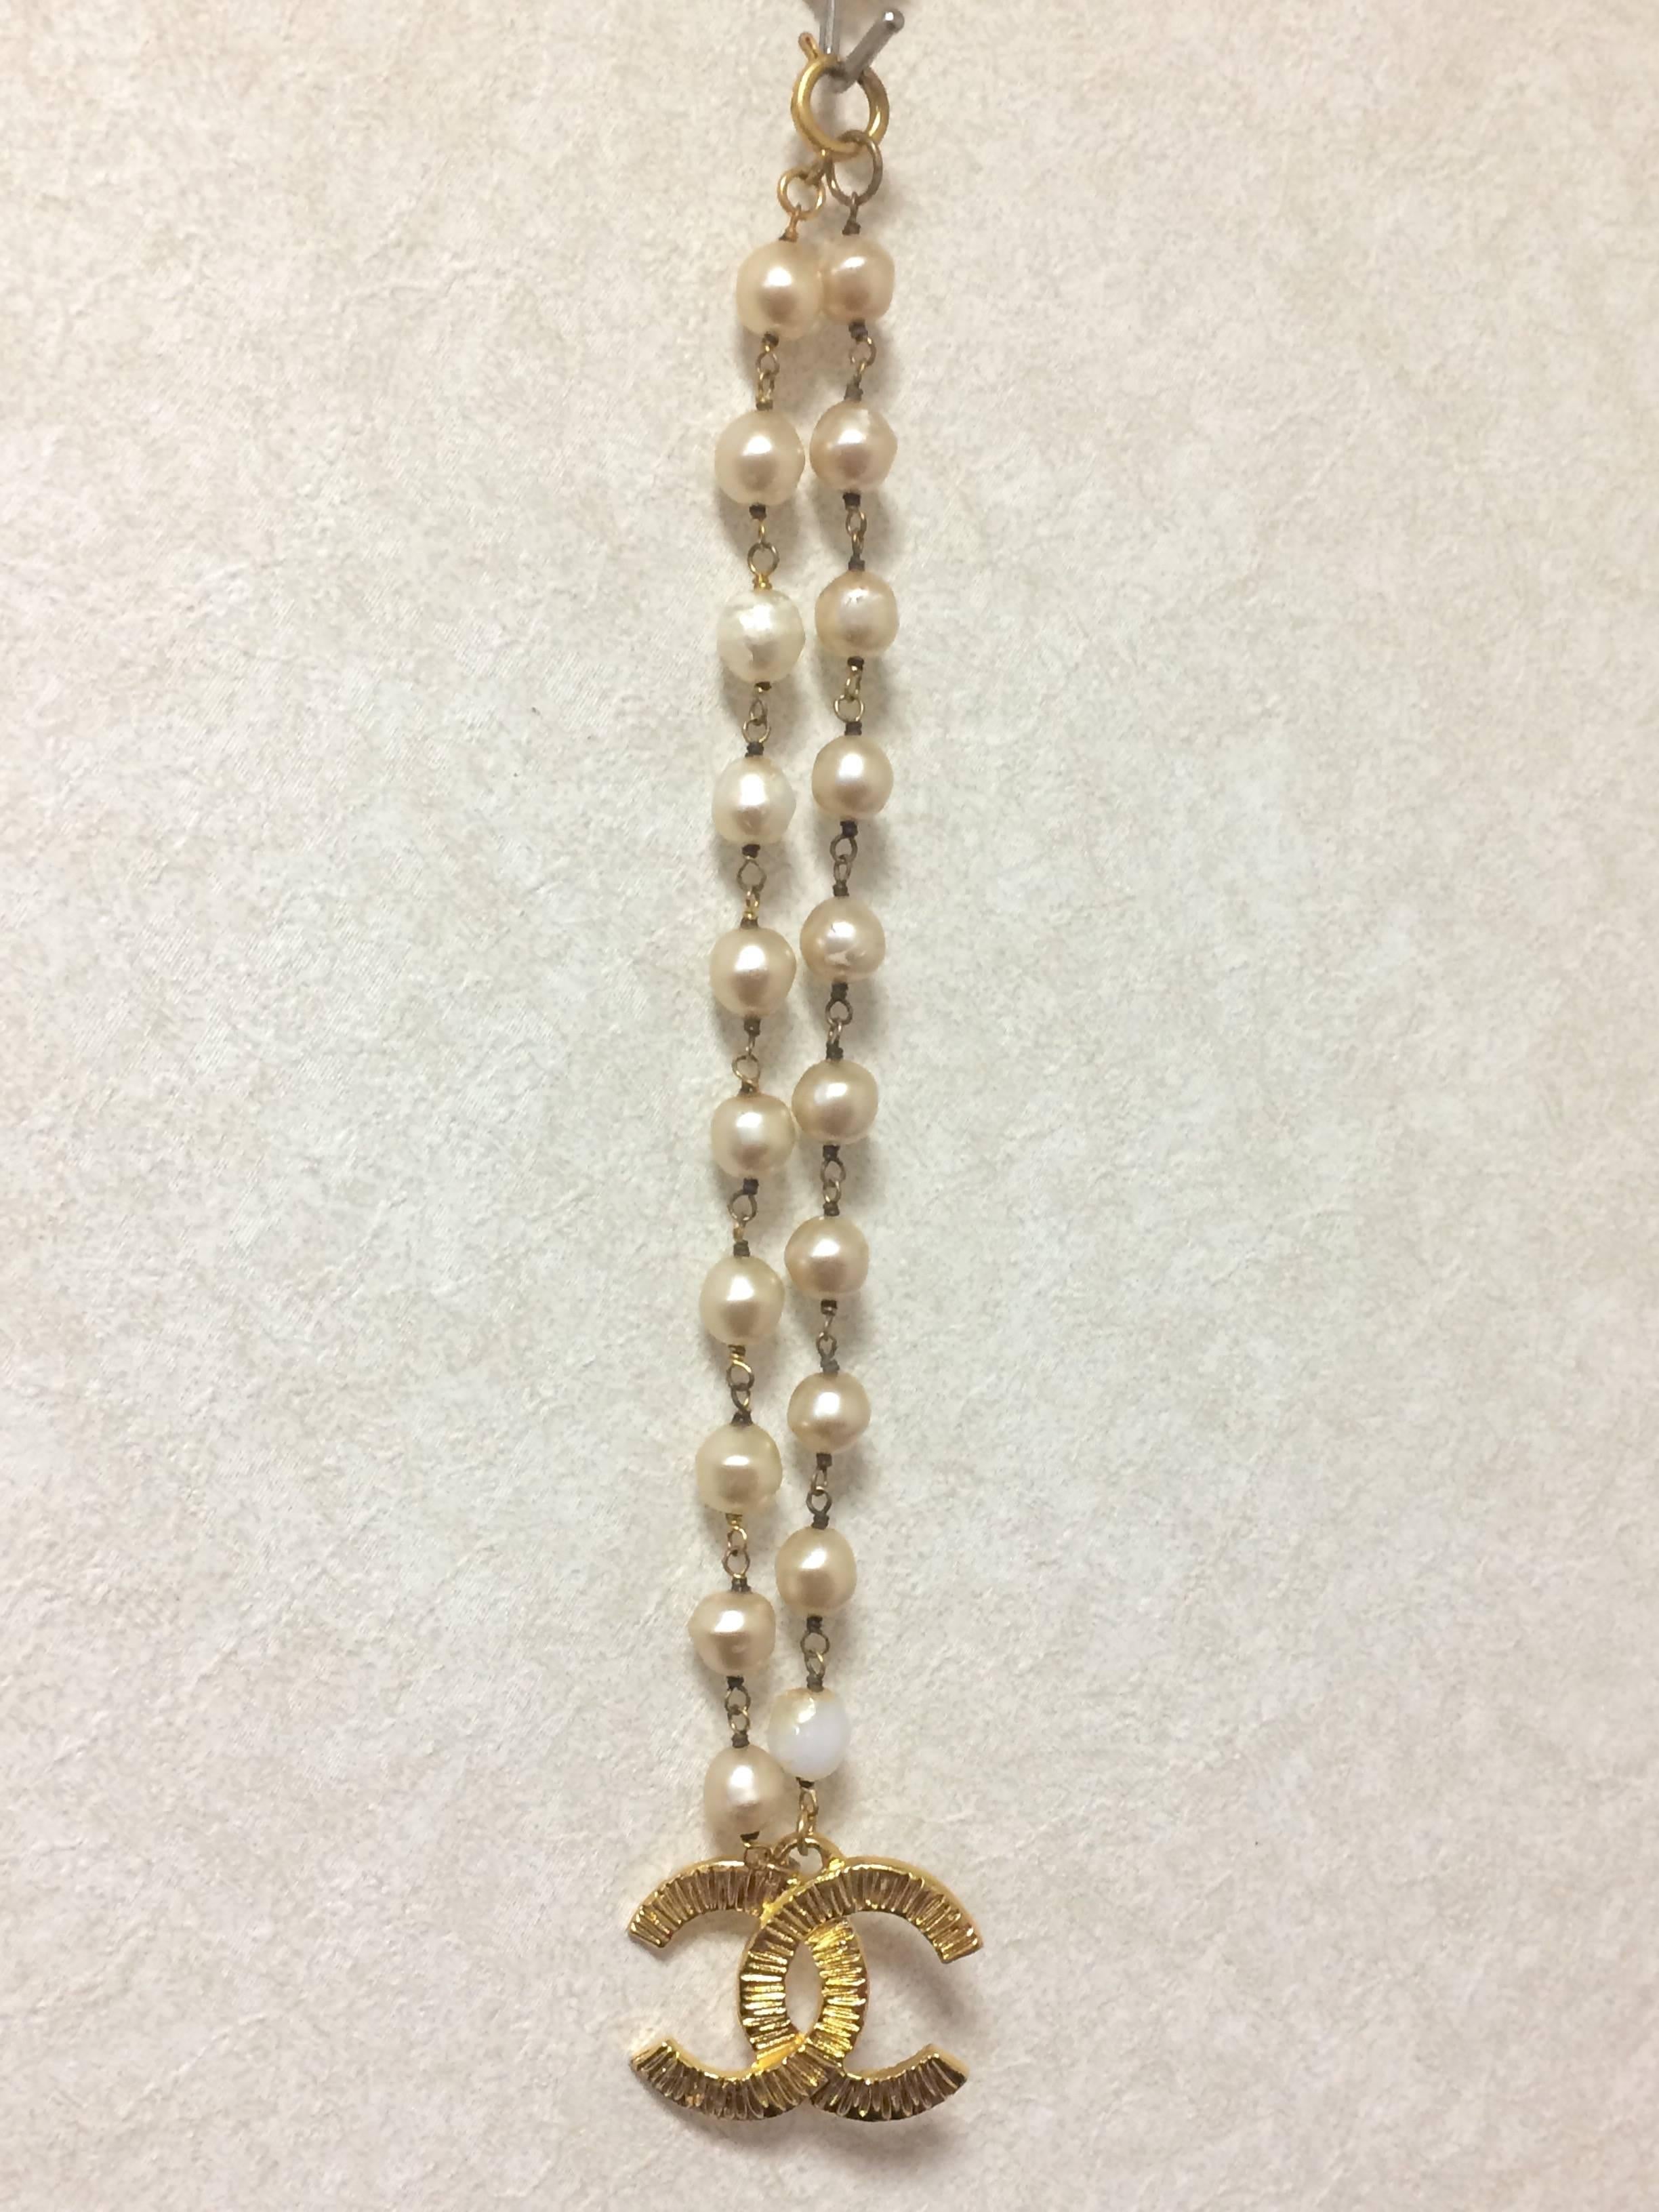 Vintage CHANEL white cream faux baroque pearl necklace with CC mark pendant top. 4